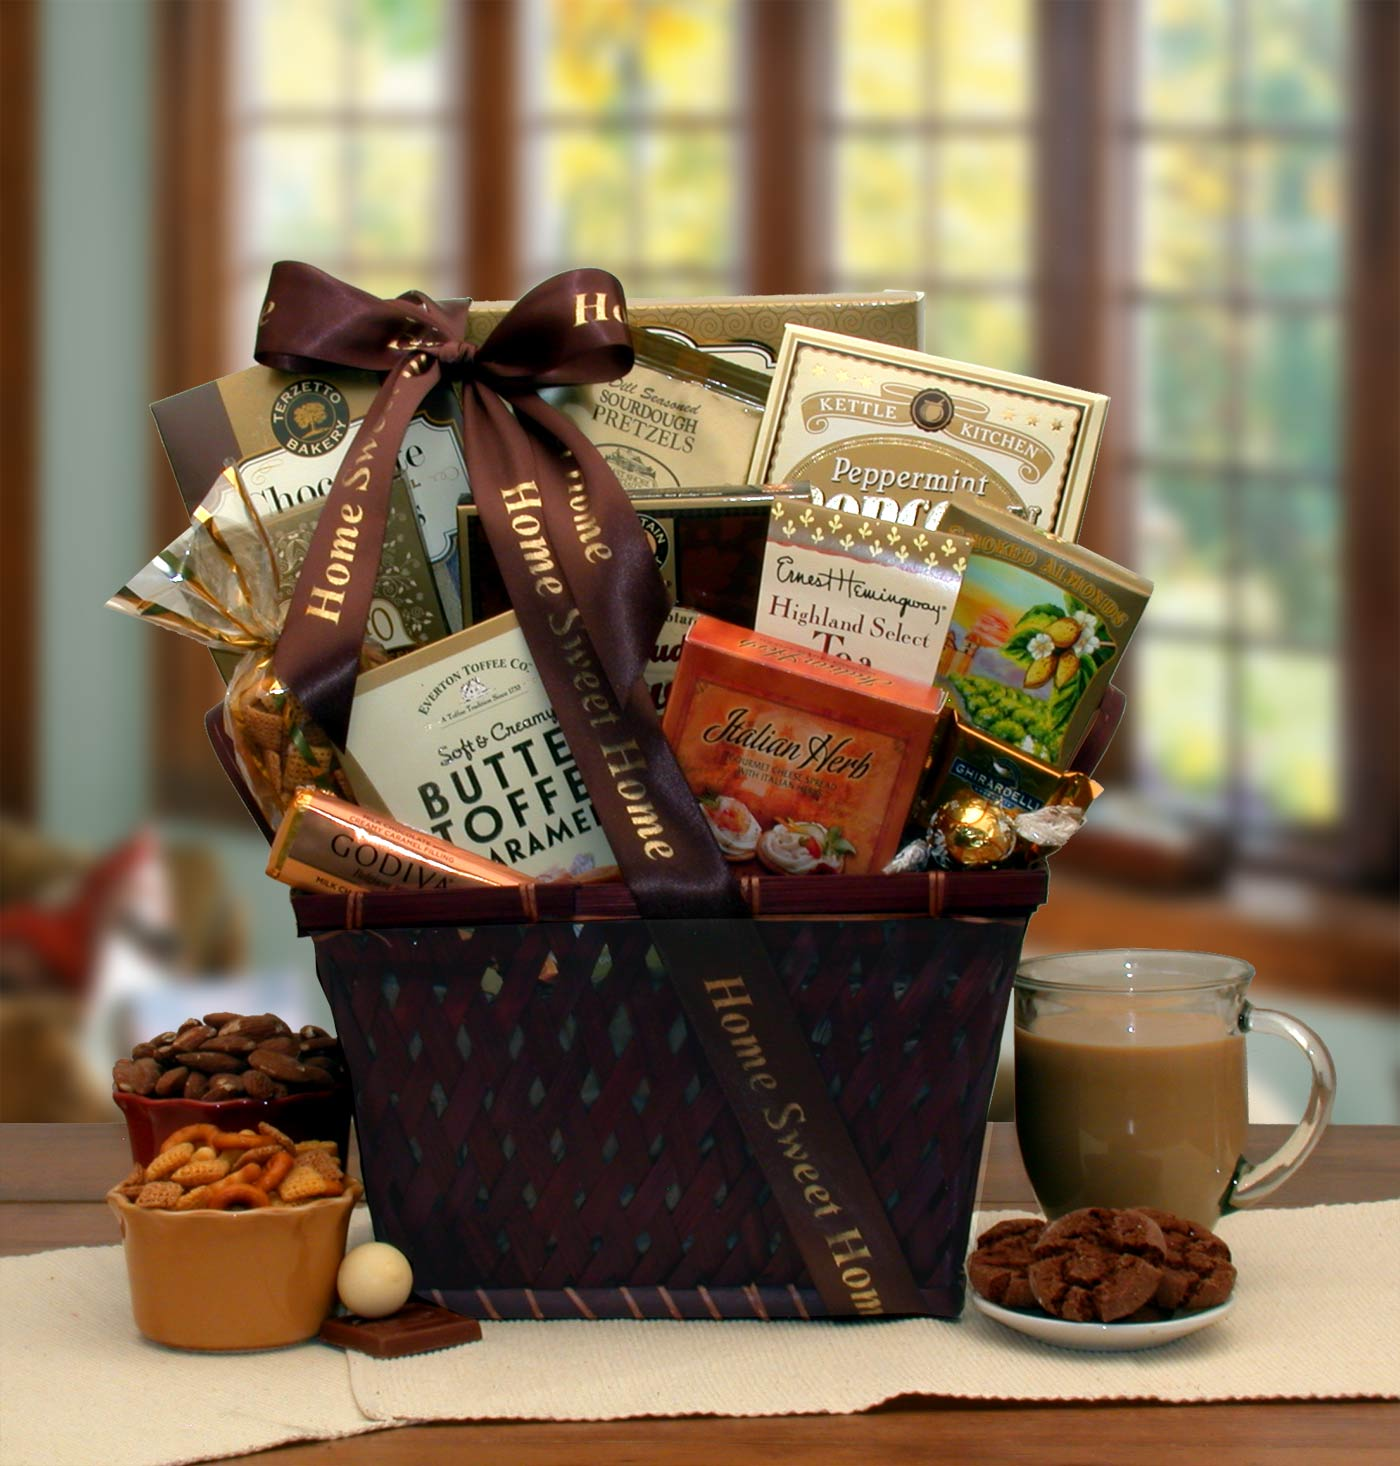 Home Is Where The Heart Is Housewarming Gift Basket | Welcome Home Gifts